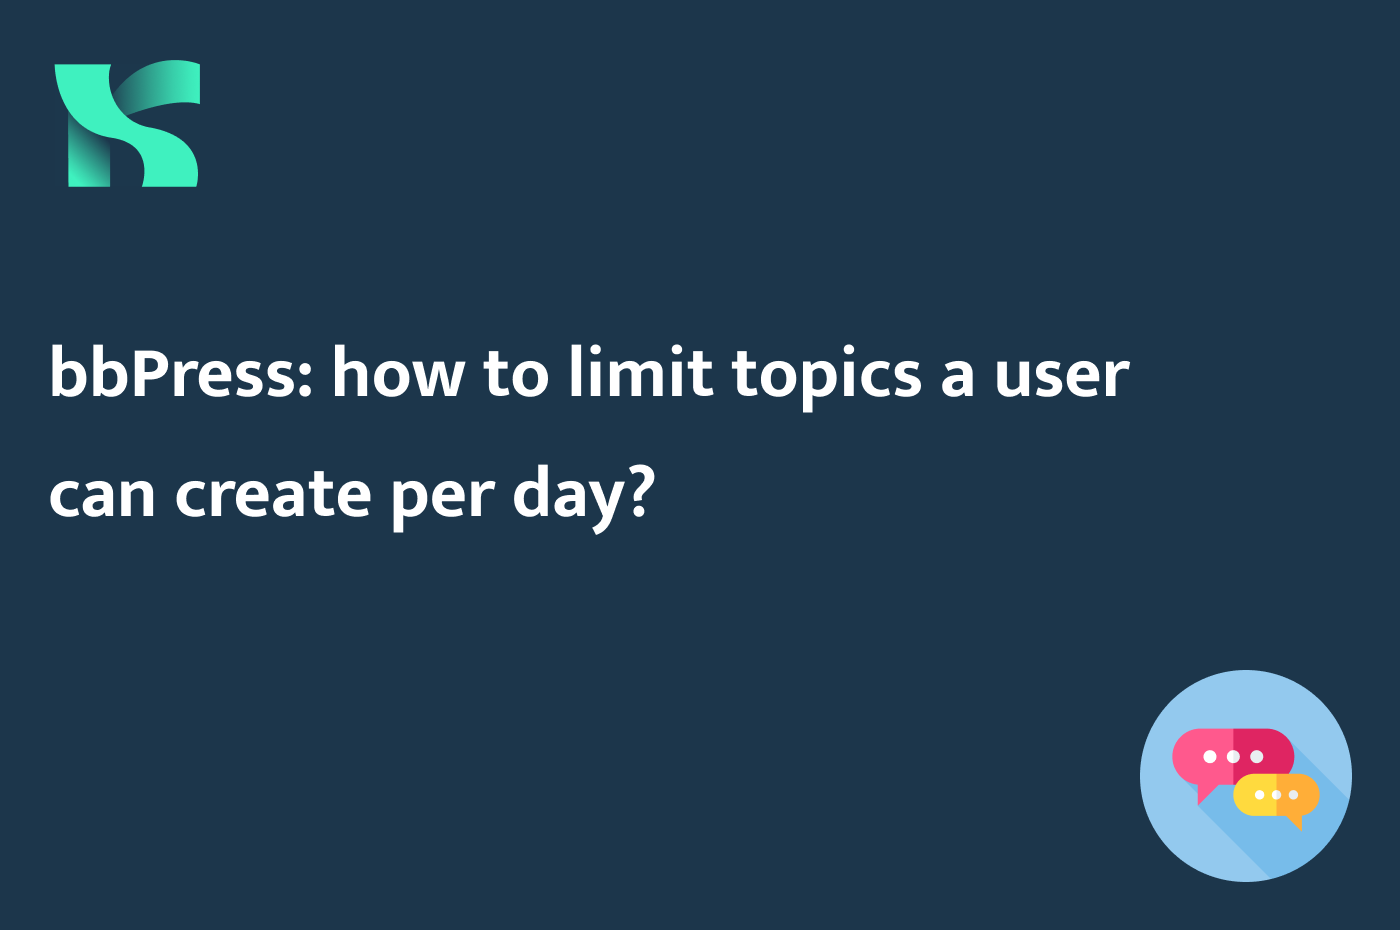 bbPress: how to limit topics a user can create per day?